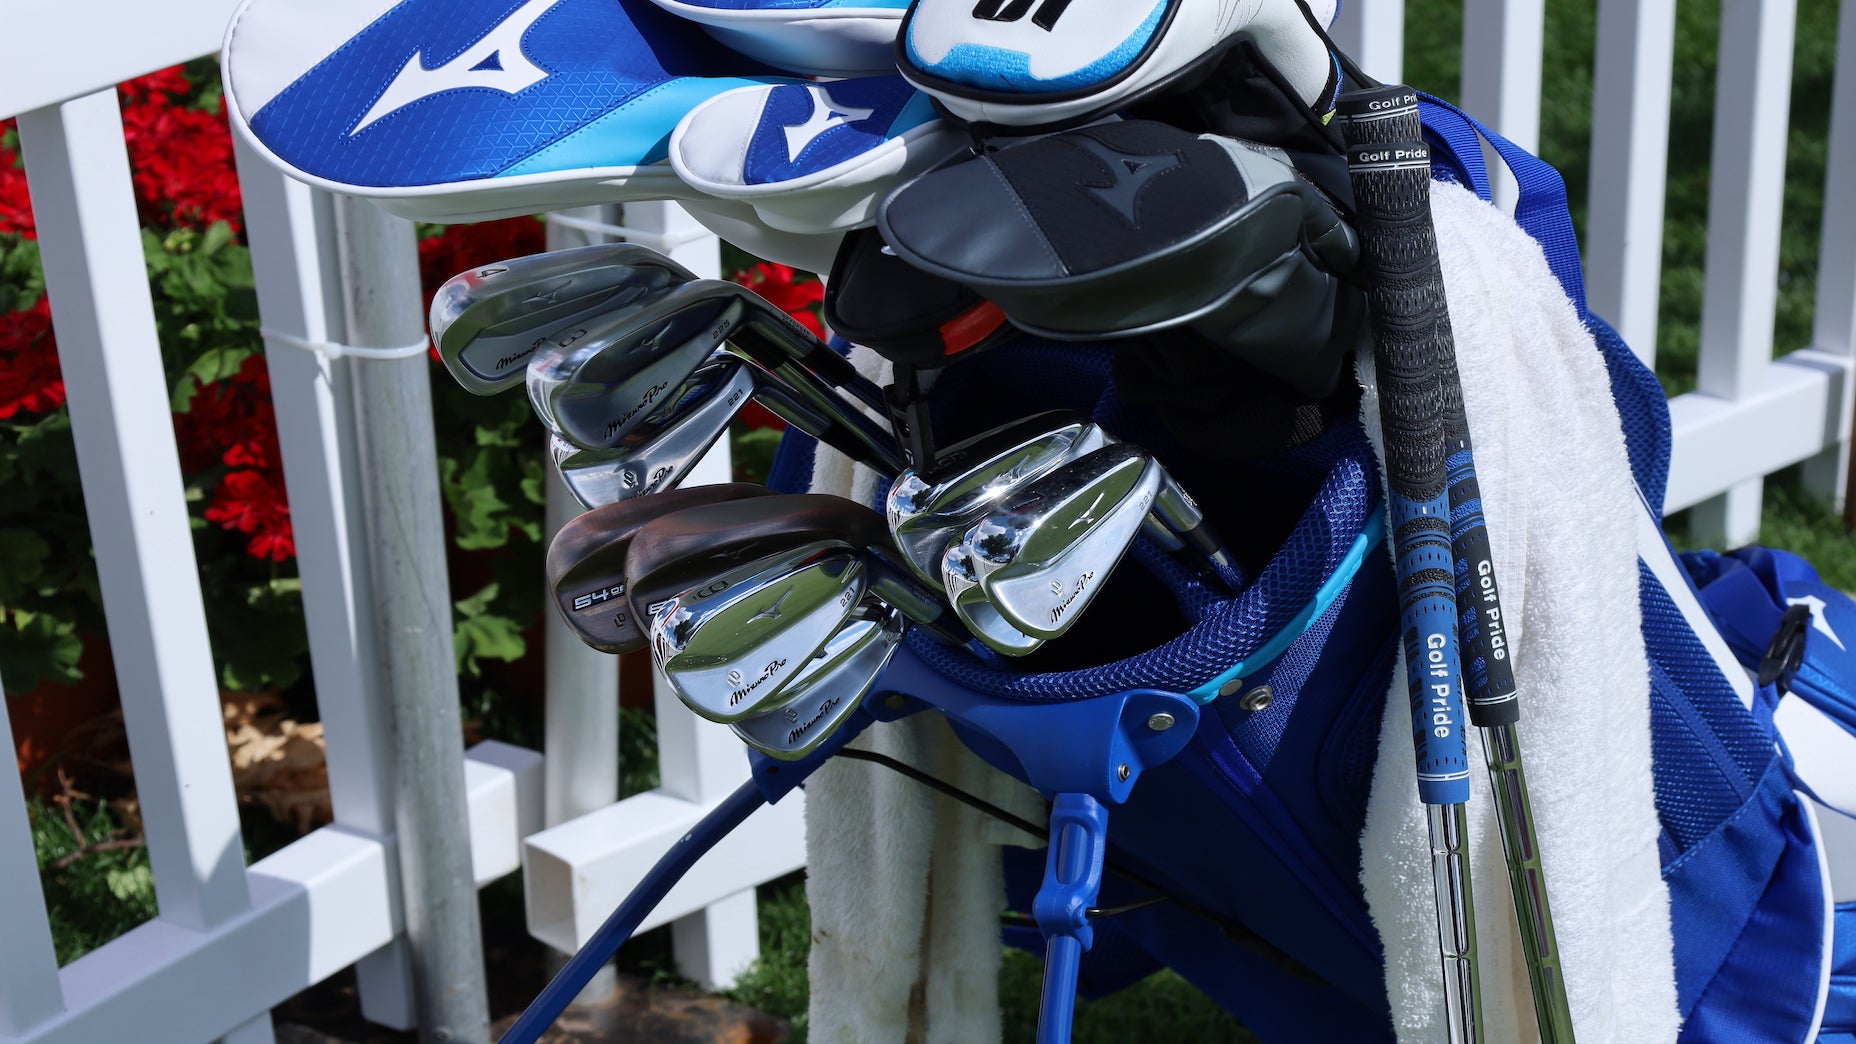 Lidl launches new golf range – yes, really!